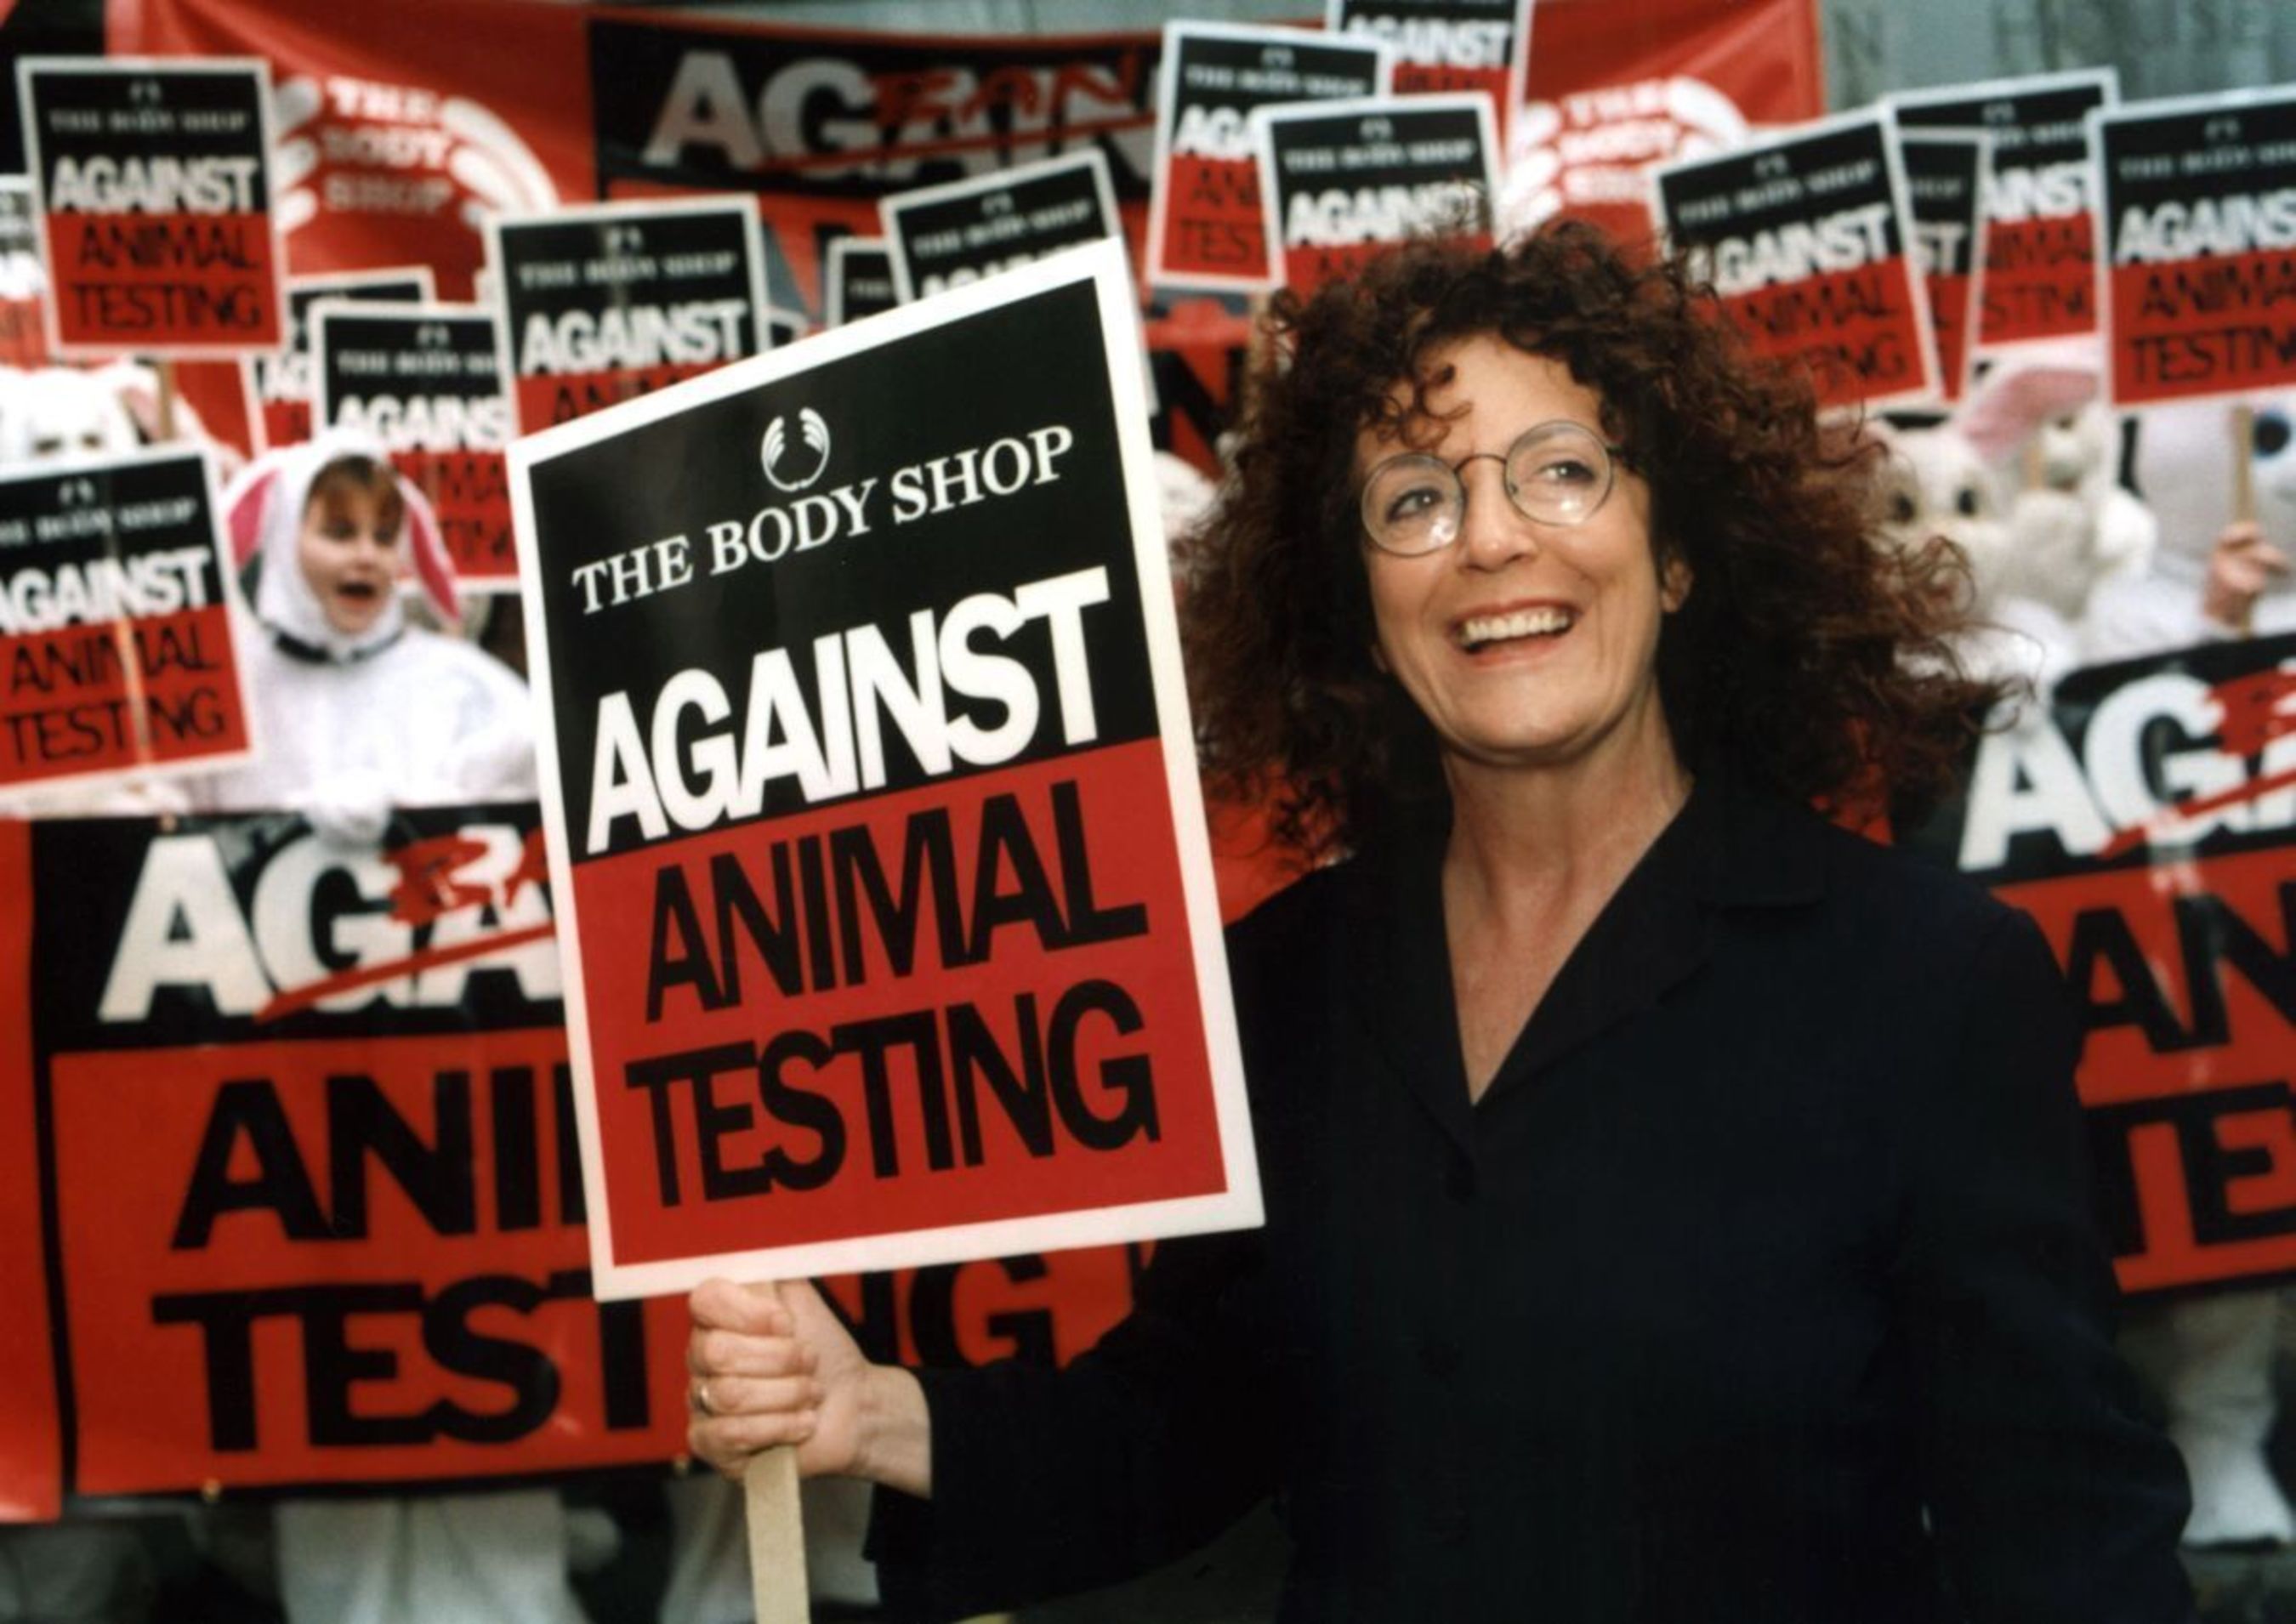 EU set to ban animal testing for cosmetics. The Body Shop and Cruelty Free International celebrate after 20 years of campaigning. Founder of The Body Shop, Dame Anita Roddick (pictured), was the inspiration behind their Against Animal Testing campaign. Cruelty Free International is now working to ensure the rest of the world follows the EUâ€™s lead.Please credit:Vismedia+44 (0)20 7287 4646 (PRNewsFoto/Cruelty Free International)